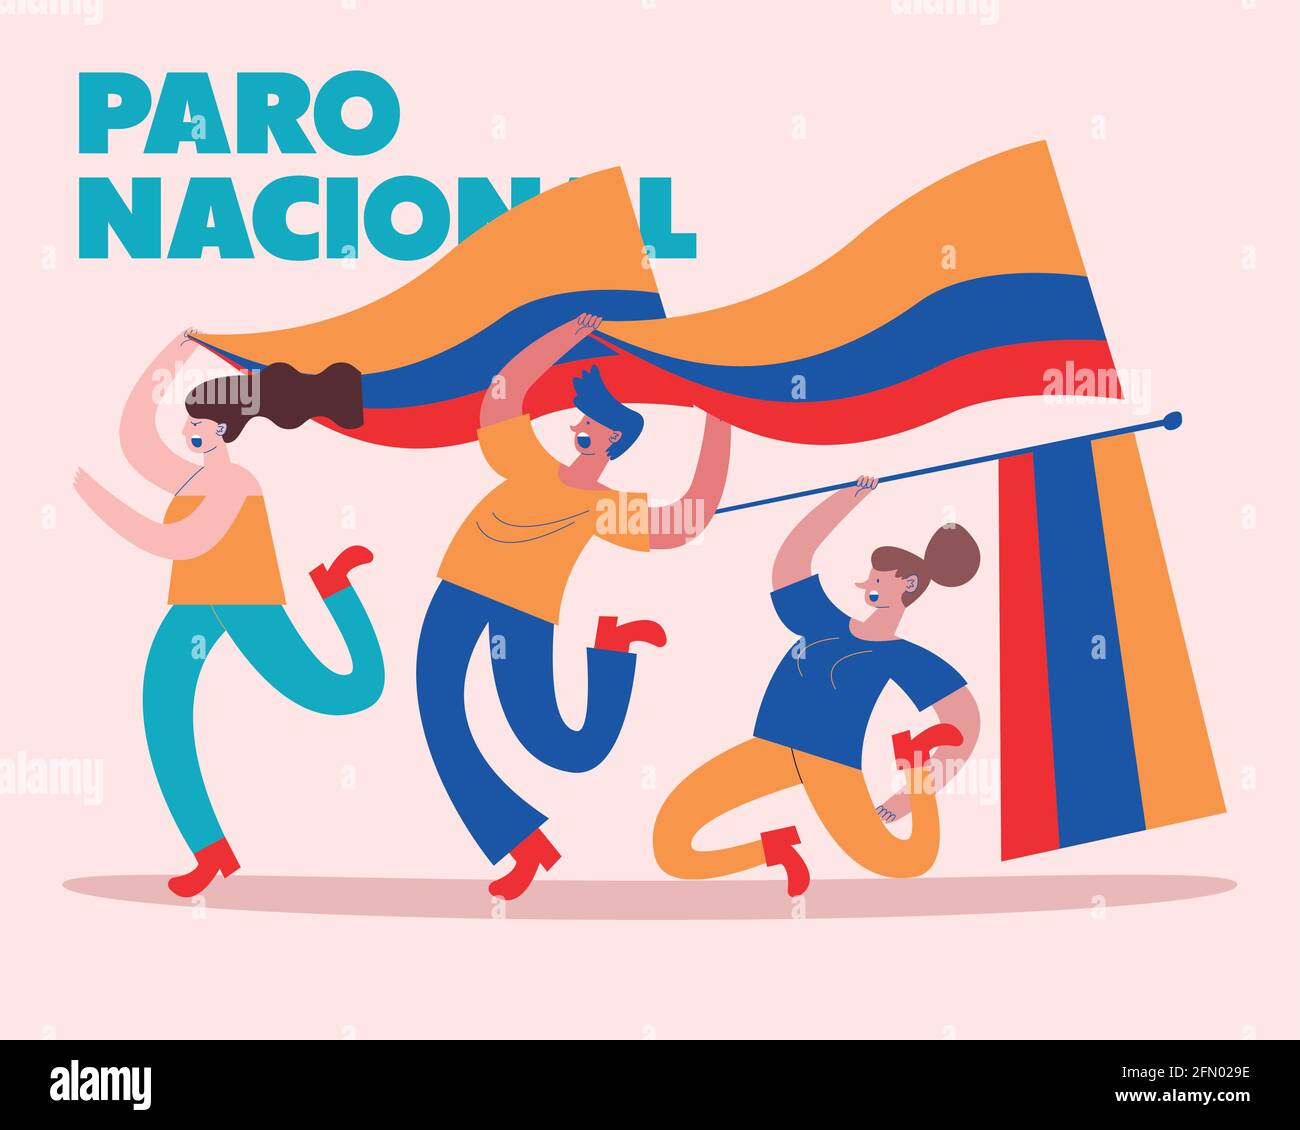 colombian national strike with protesters and flags Stock Vector